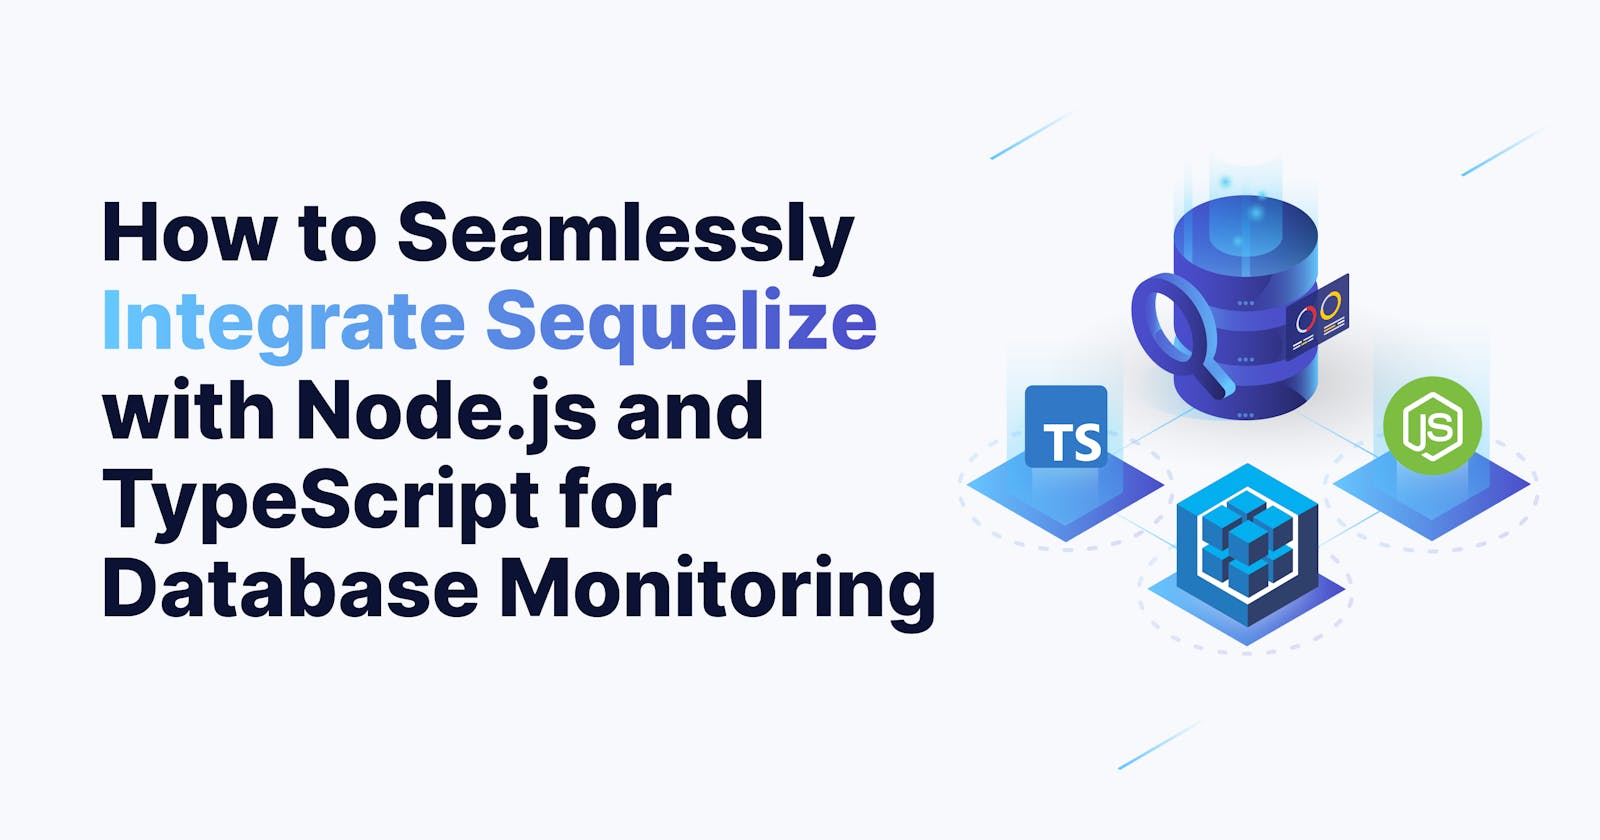 How To Seamlessly Integrate Sequelize with Node.js and JavaScript for Database Monitoring